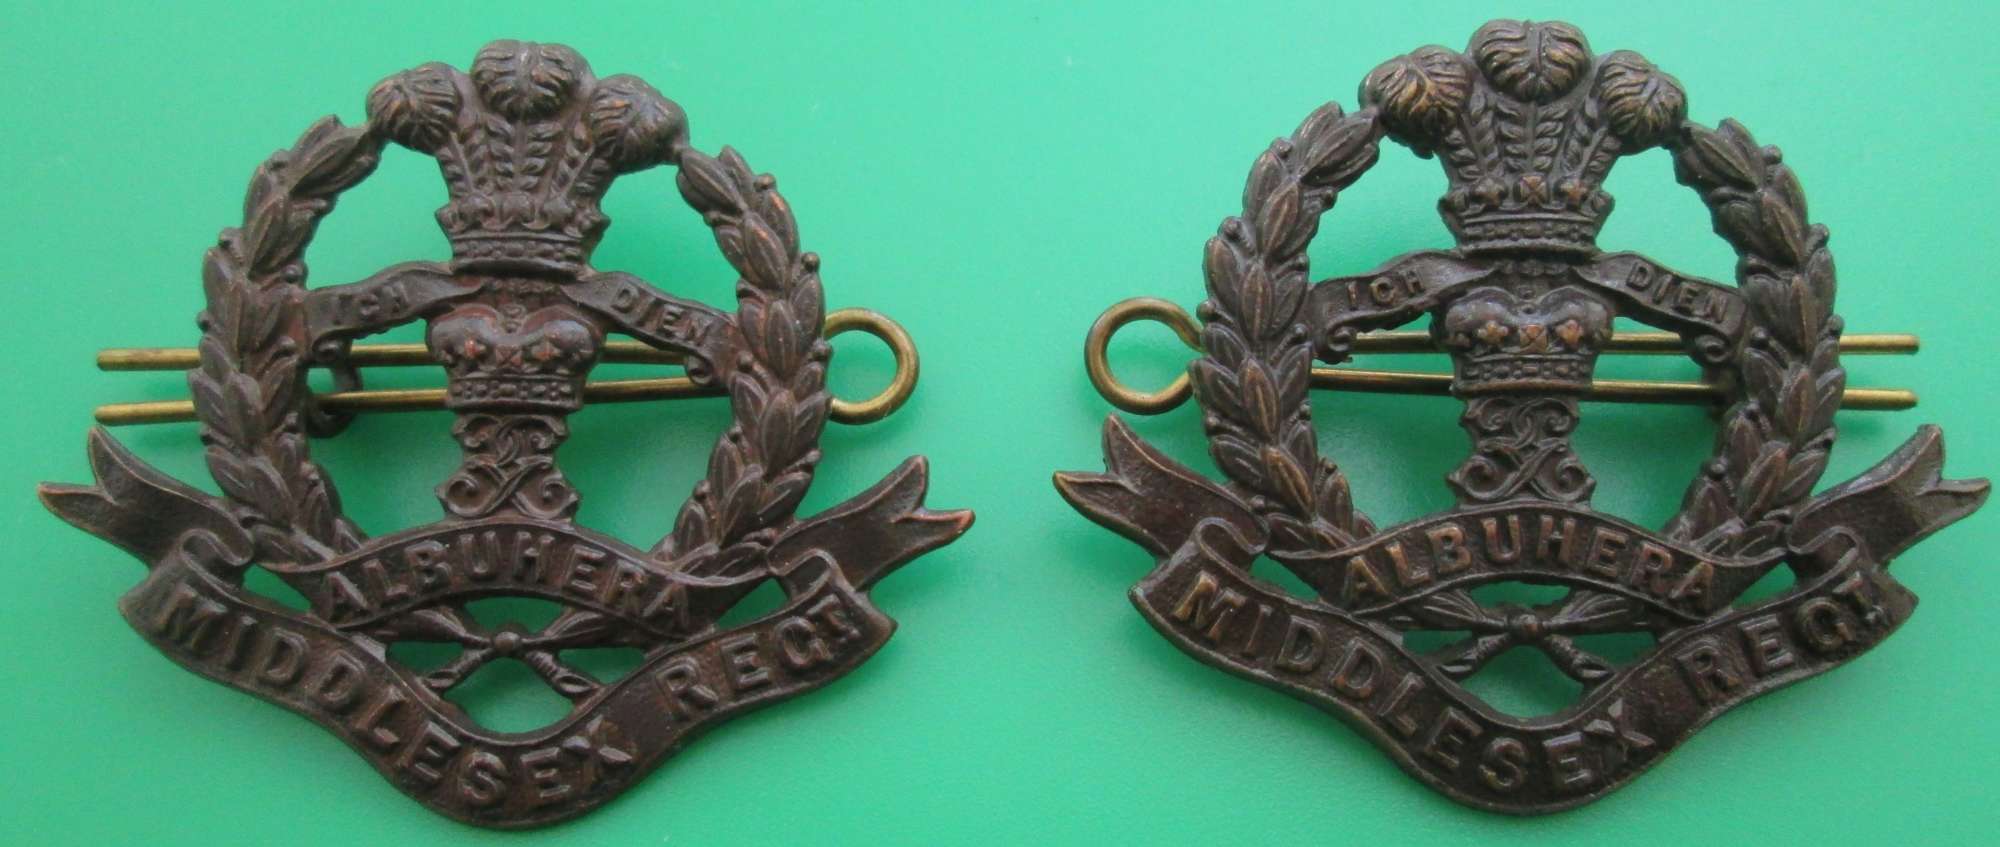 A PAIR OF OFFICERS BRONZE COLLAR DOGS FOR THE MIDDLESEX REGIMENT